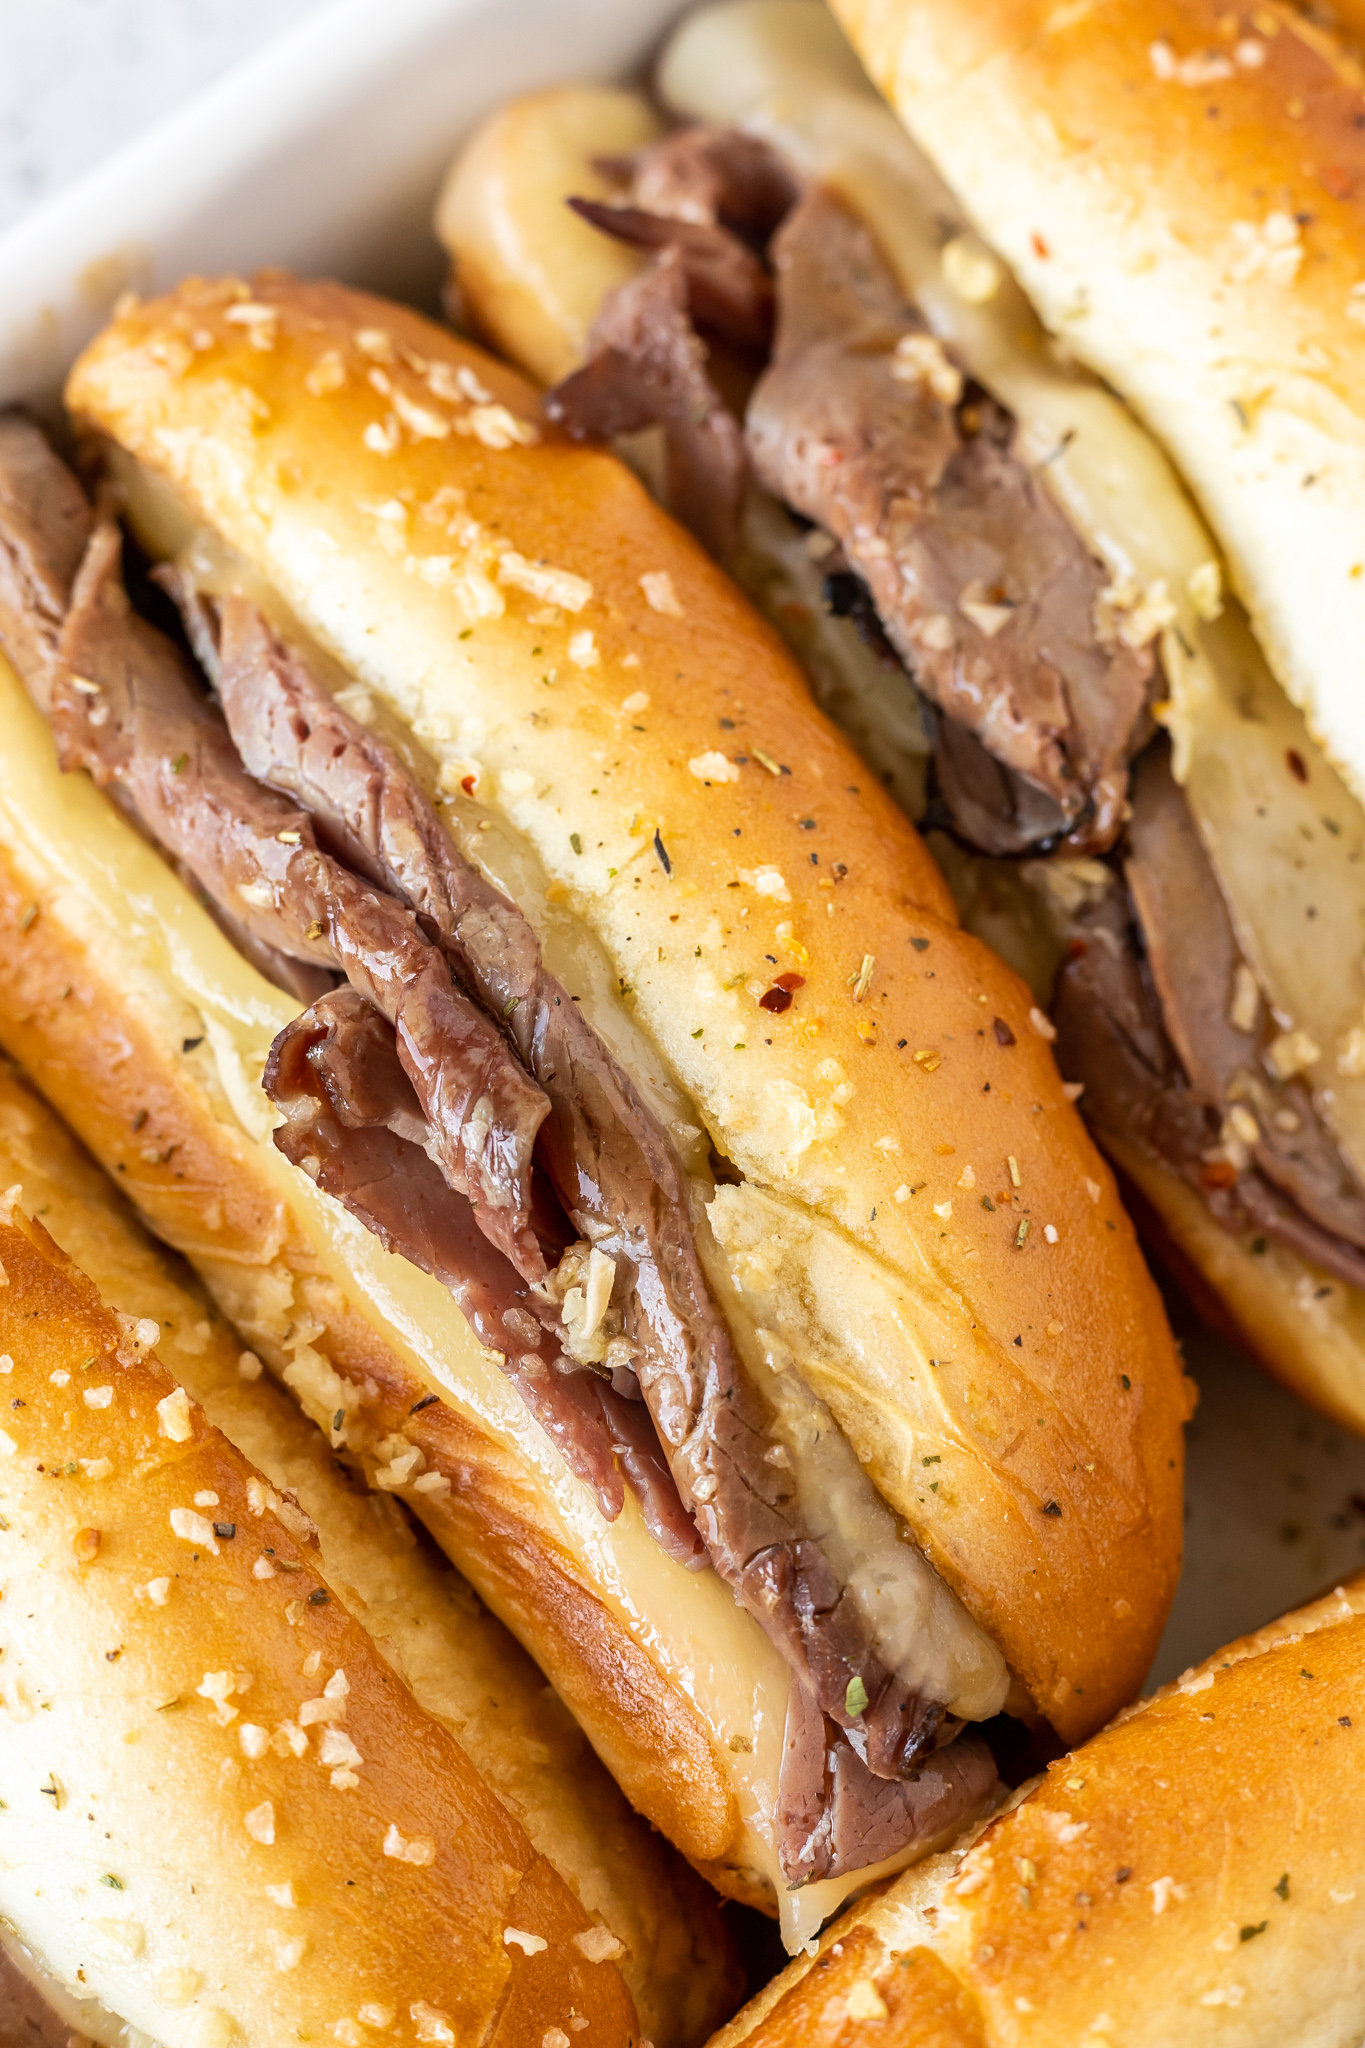 5-Ingredient Slow Cooker French Dip Sandwiches - So Good!